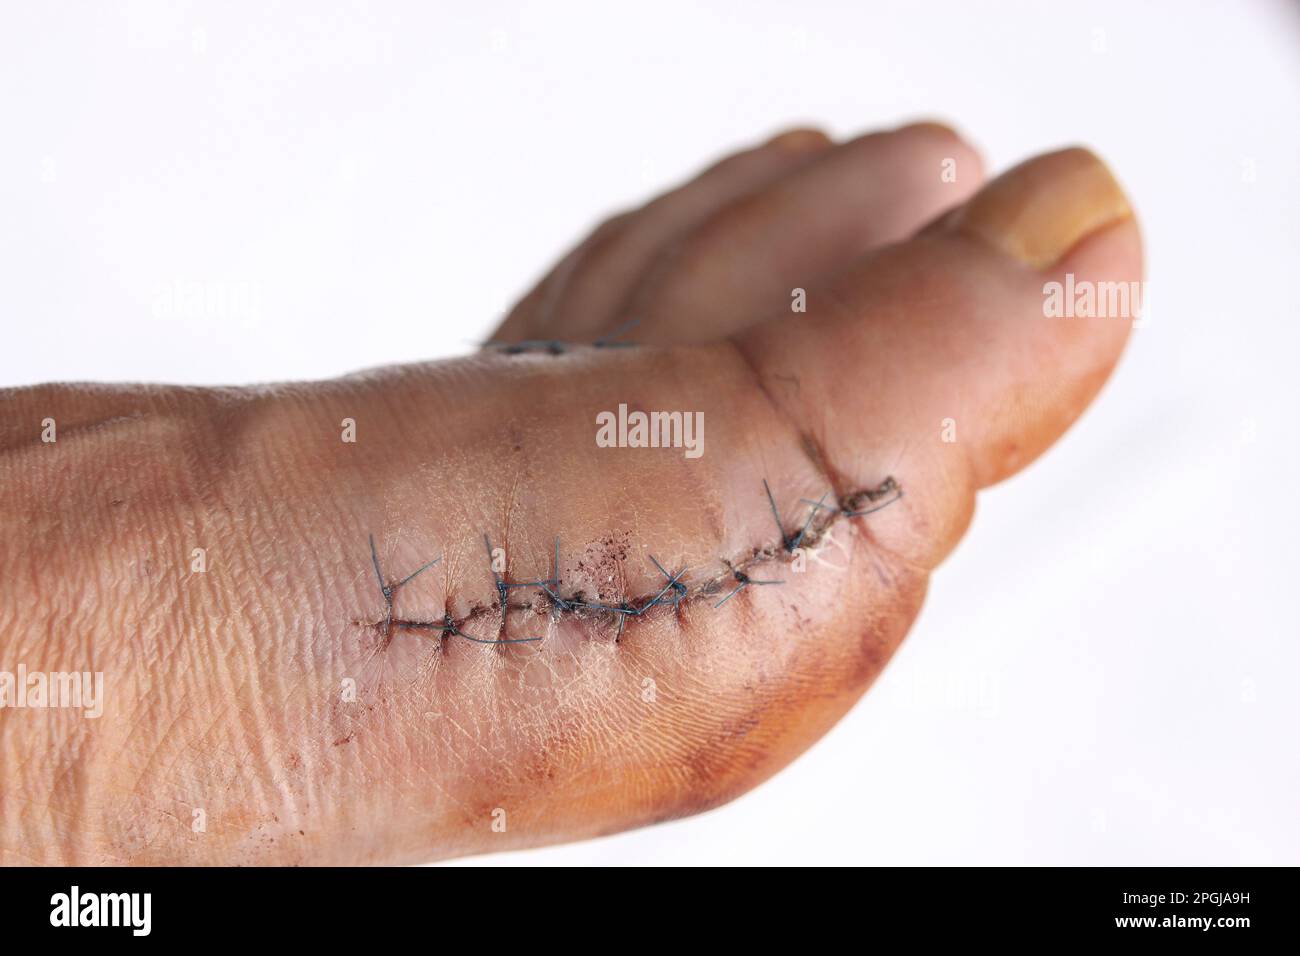 Hallux valgus, foot after surgery Stock Photo